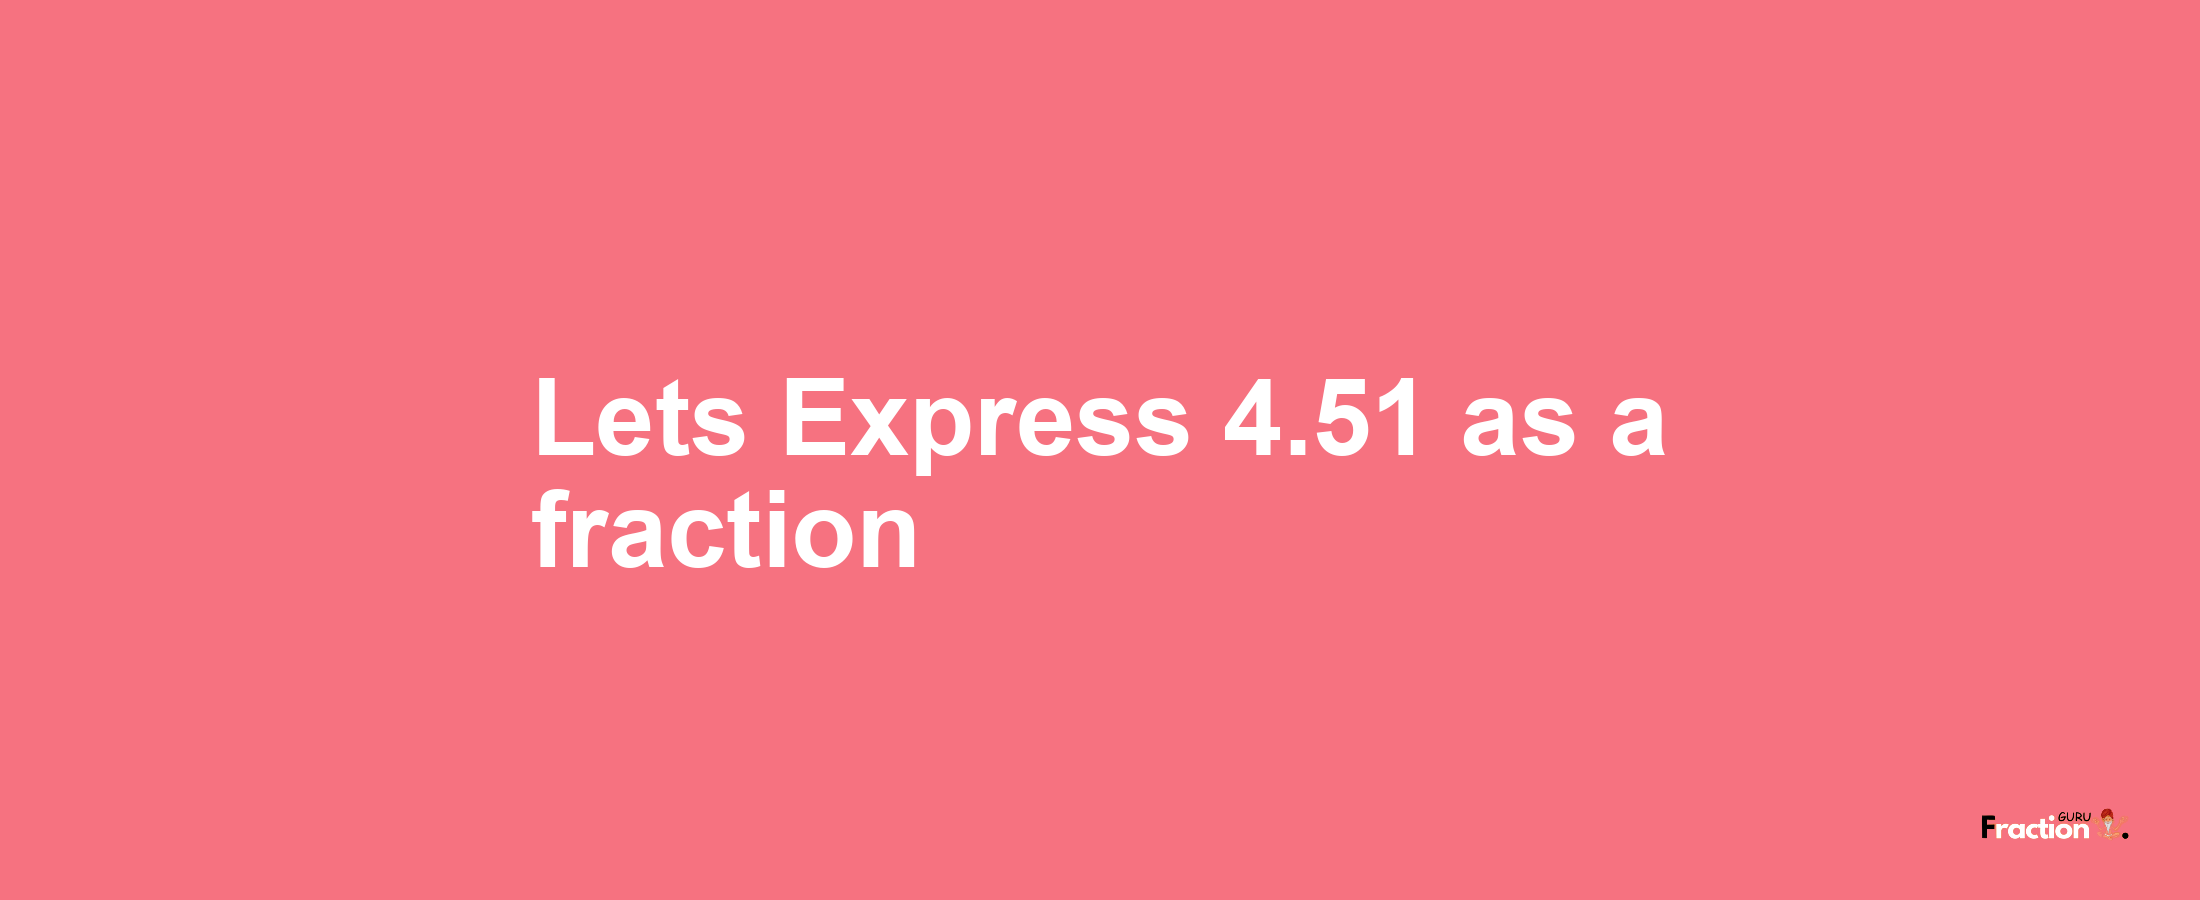 Lets Express 4.51 as afraction